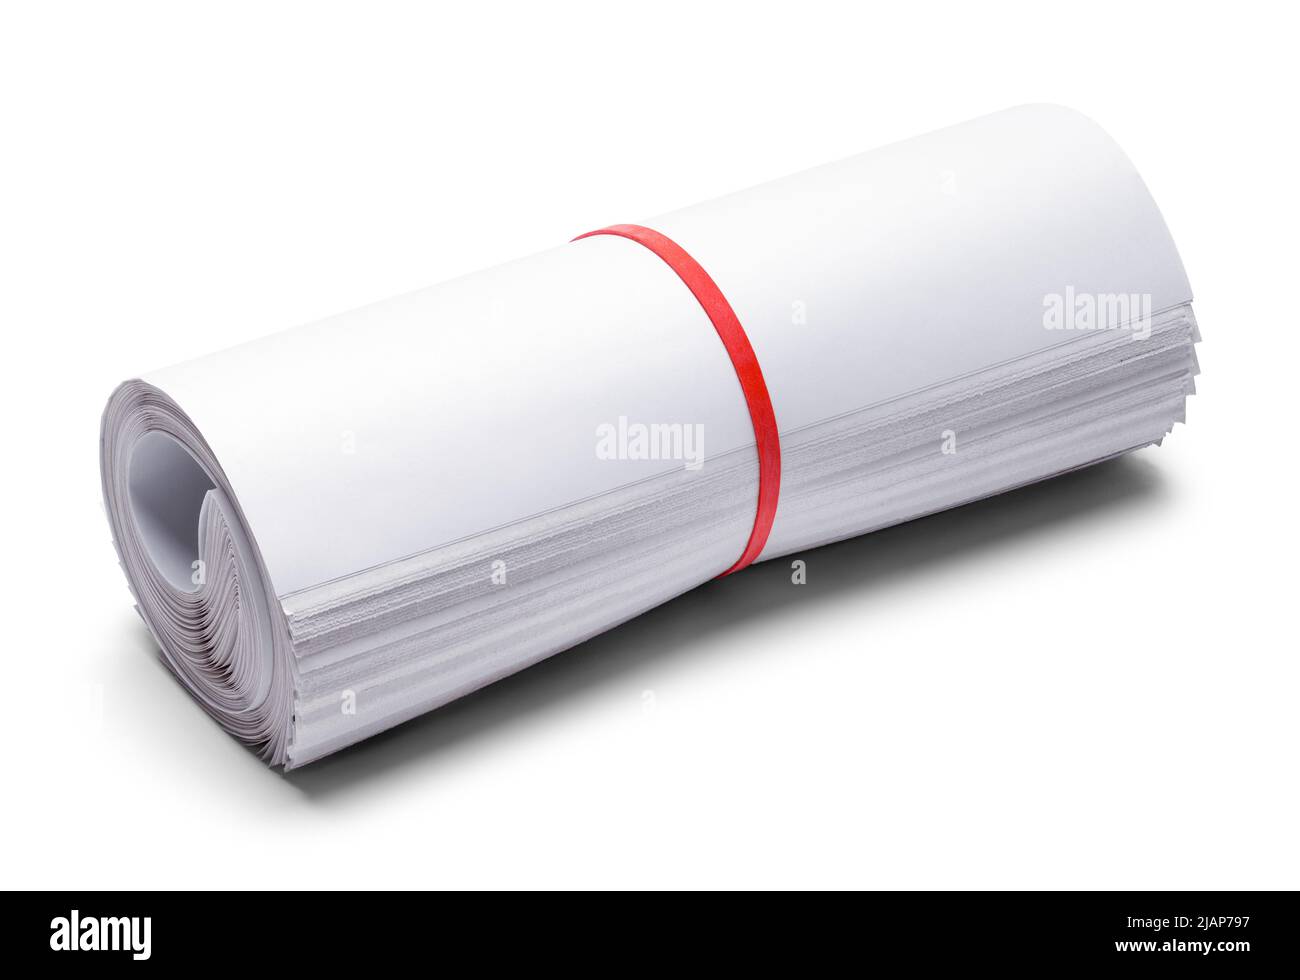 Large Rolled Newspaper Cut Out on White. Stock Photo